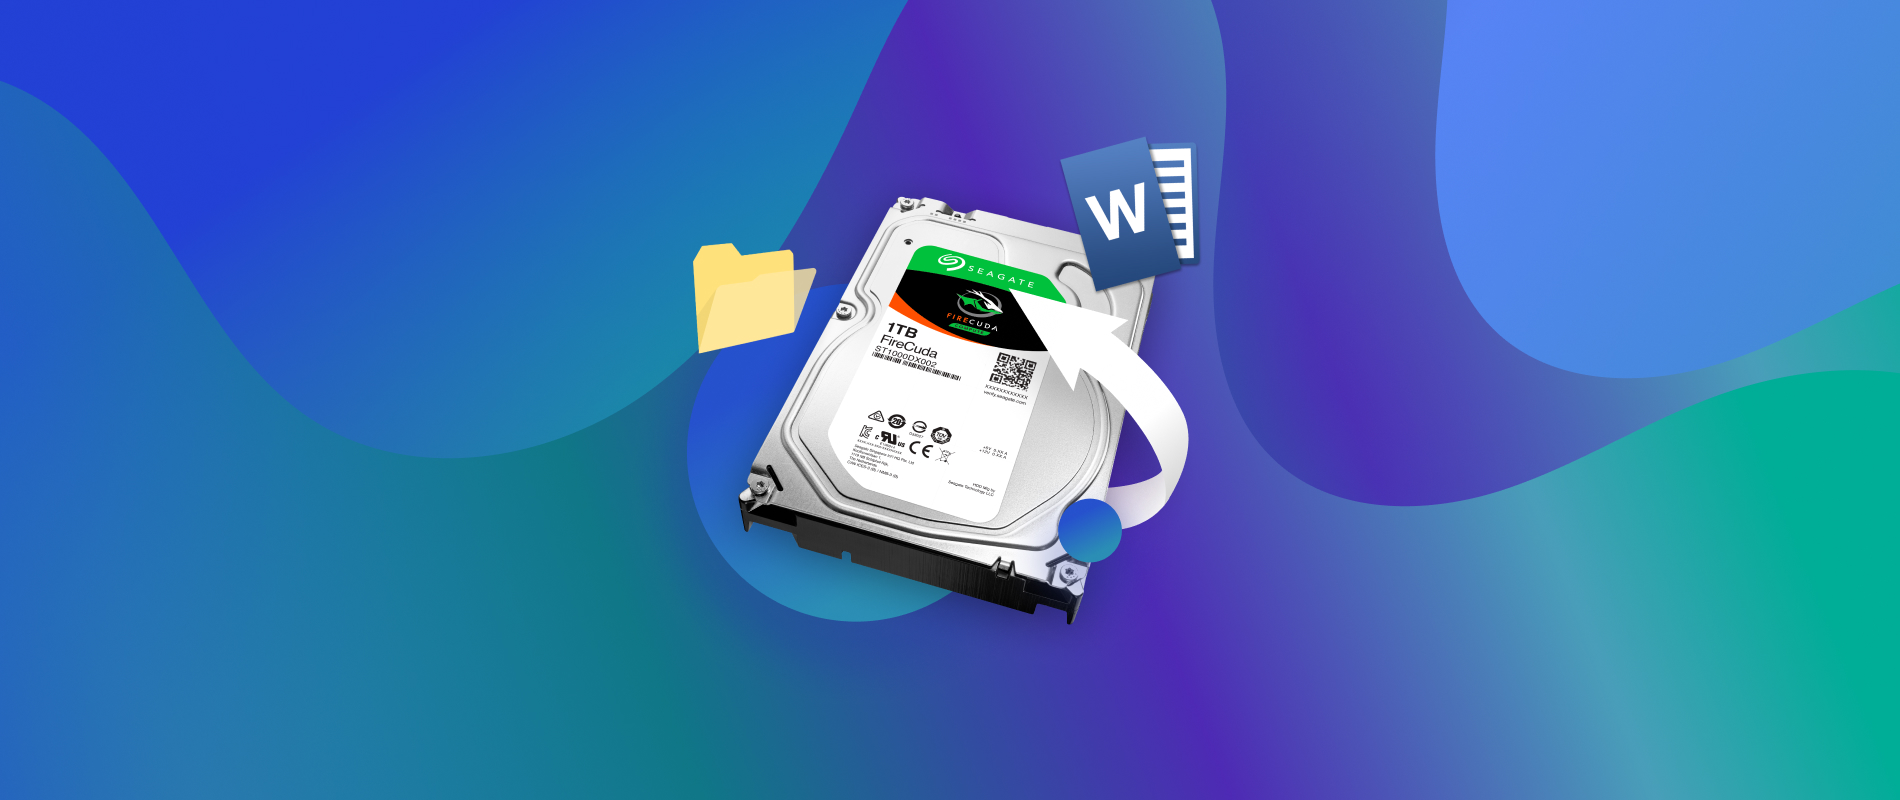 Seagate's Firecuda SSHD is a great replacement for traditional hard drives  in your PC